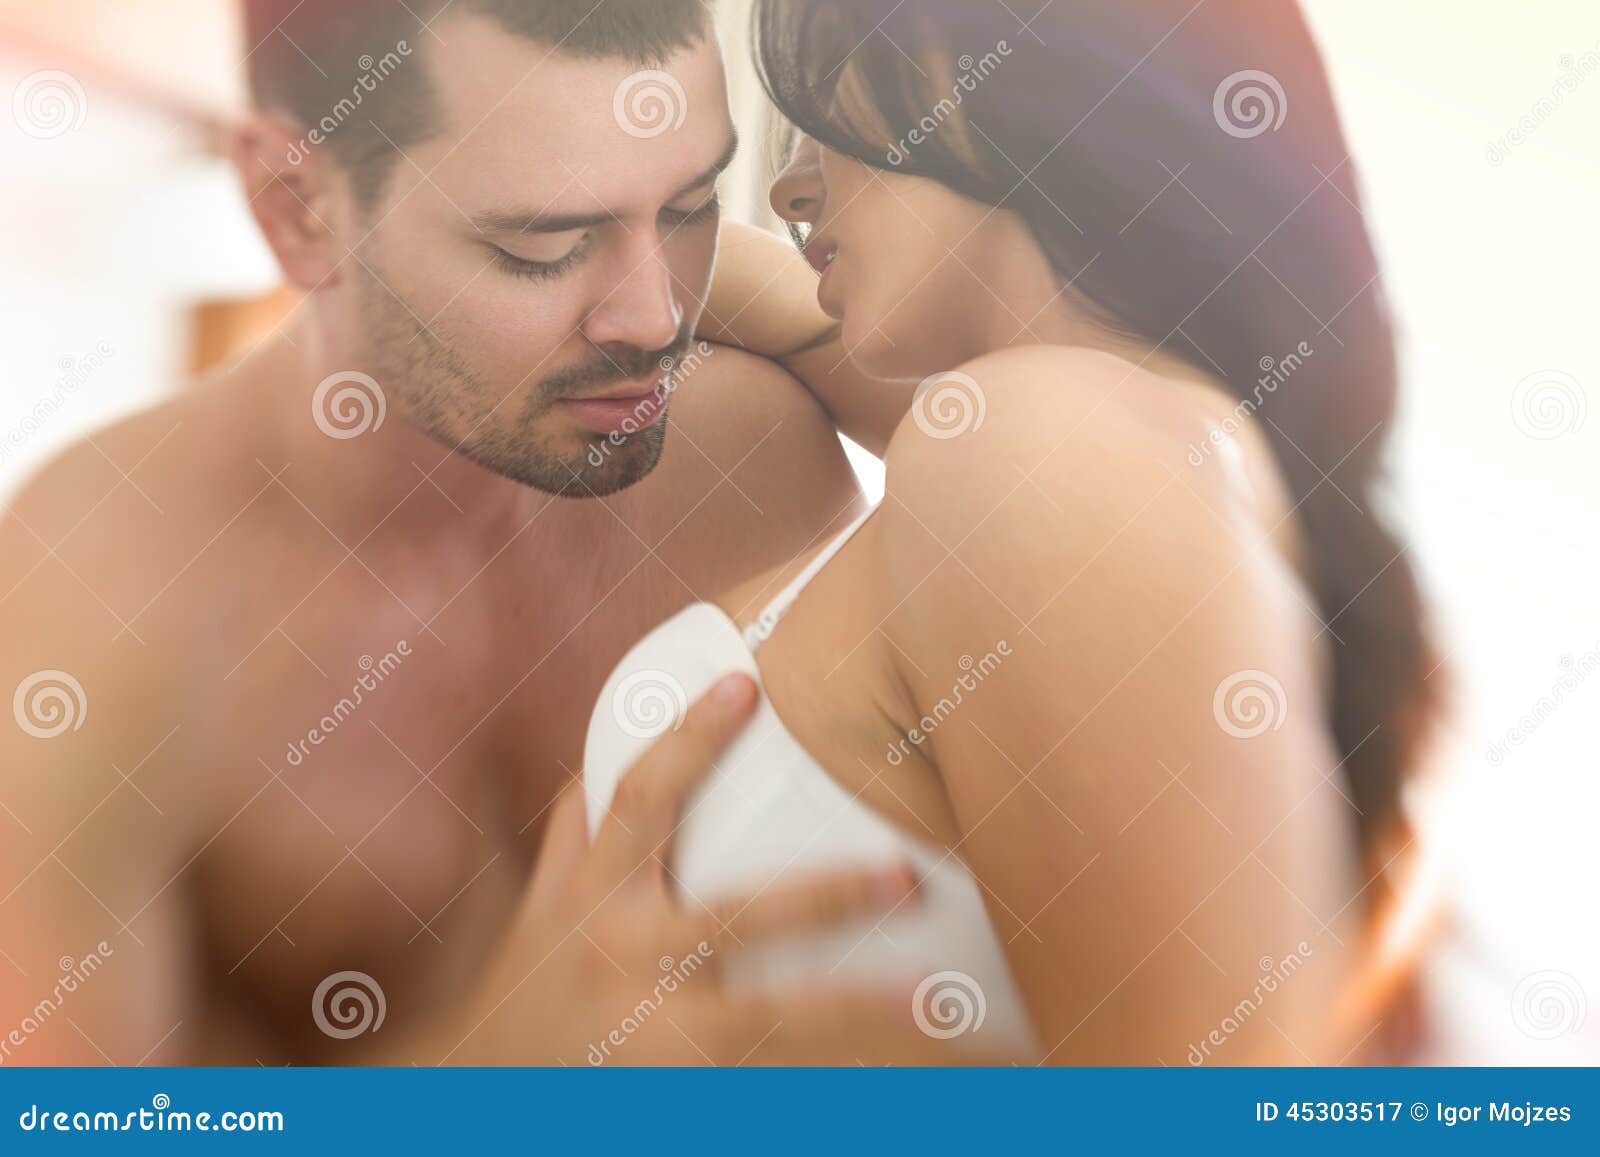 Man hand take woman breast stock image. Image of foreplay - 45303517